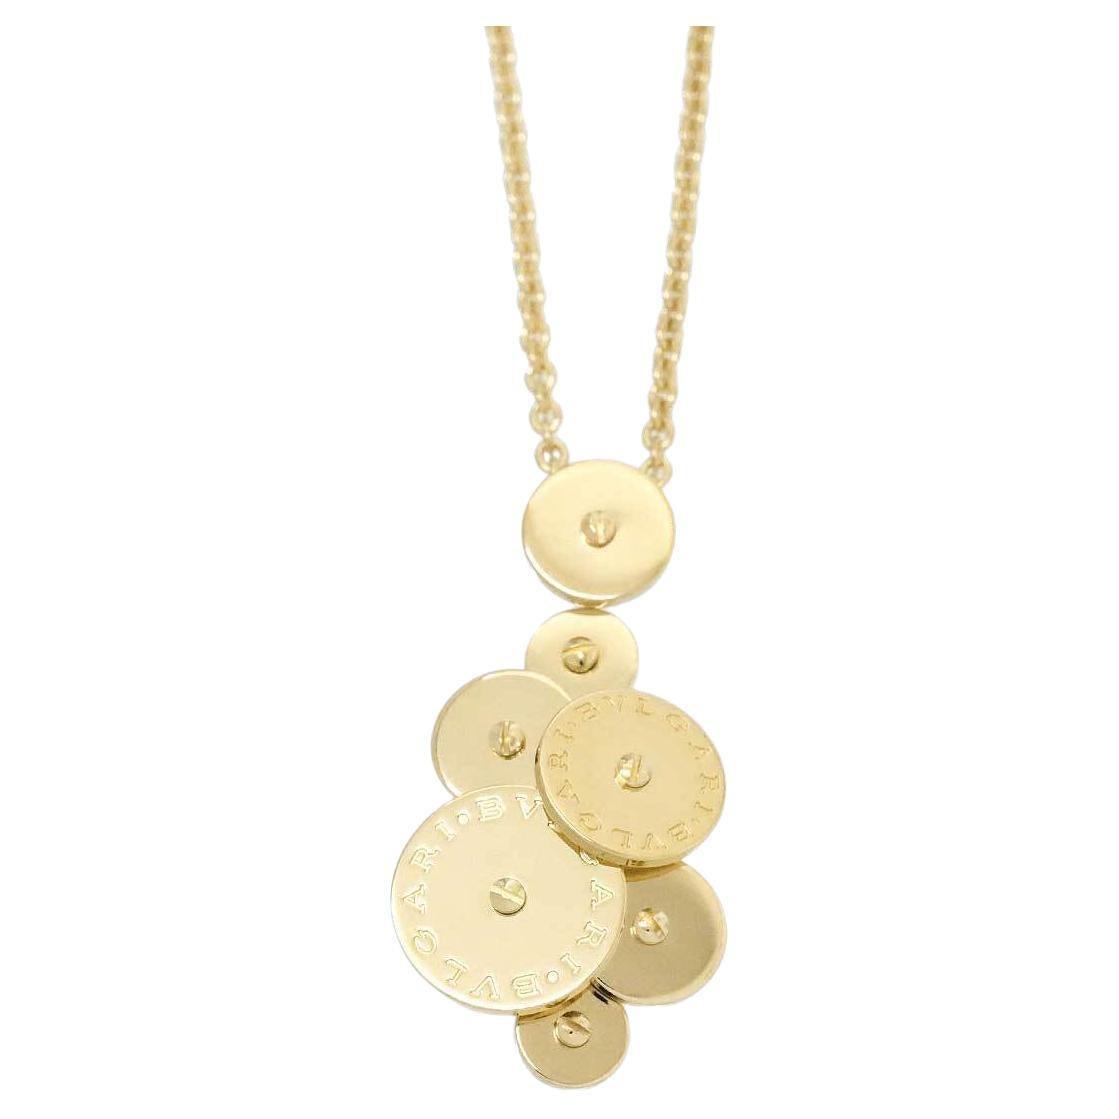 Bvlgari Cicladi Collection Small Pendant Necklace in 18k Yellow Gold For Sale